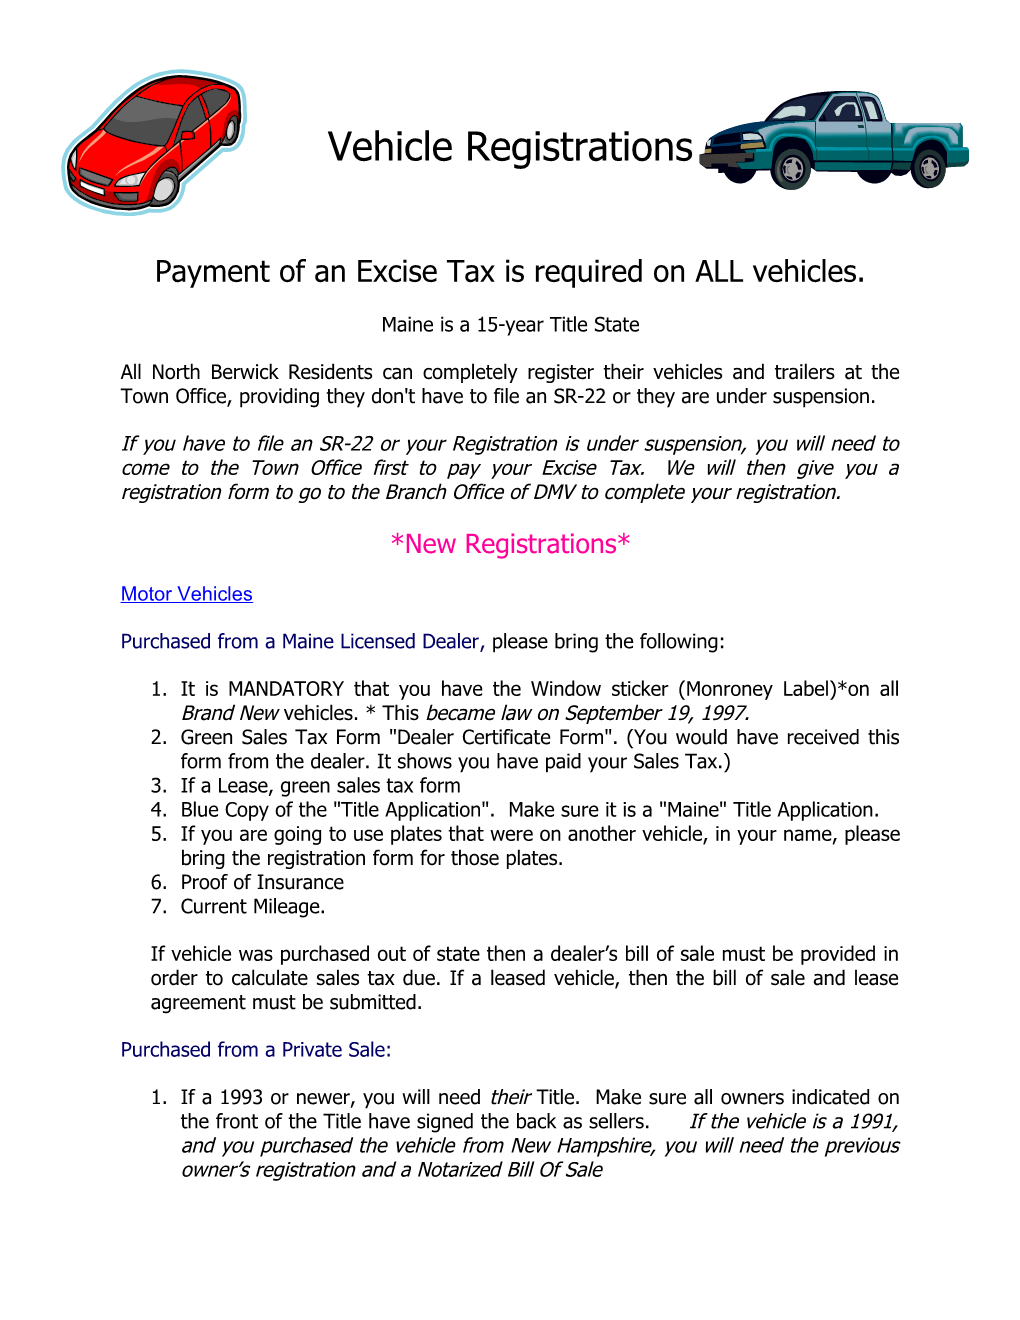 Payment of an Excise Tax Is Required on ALL Vehicles